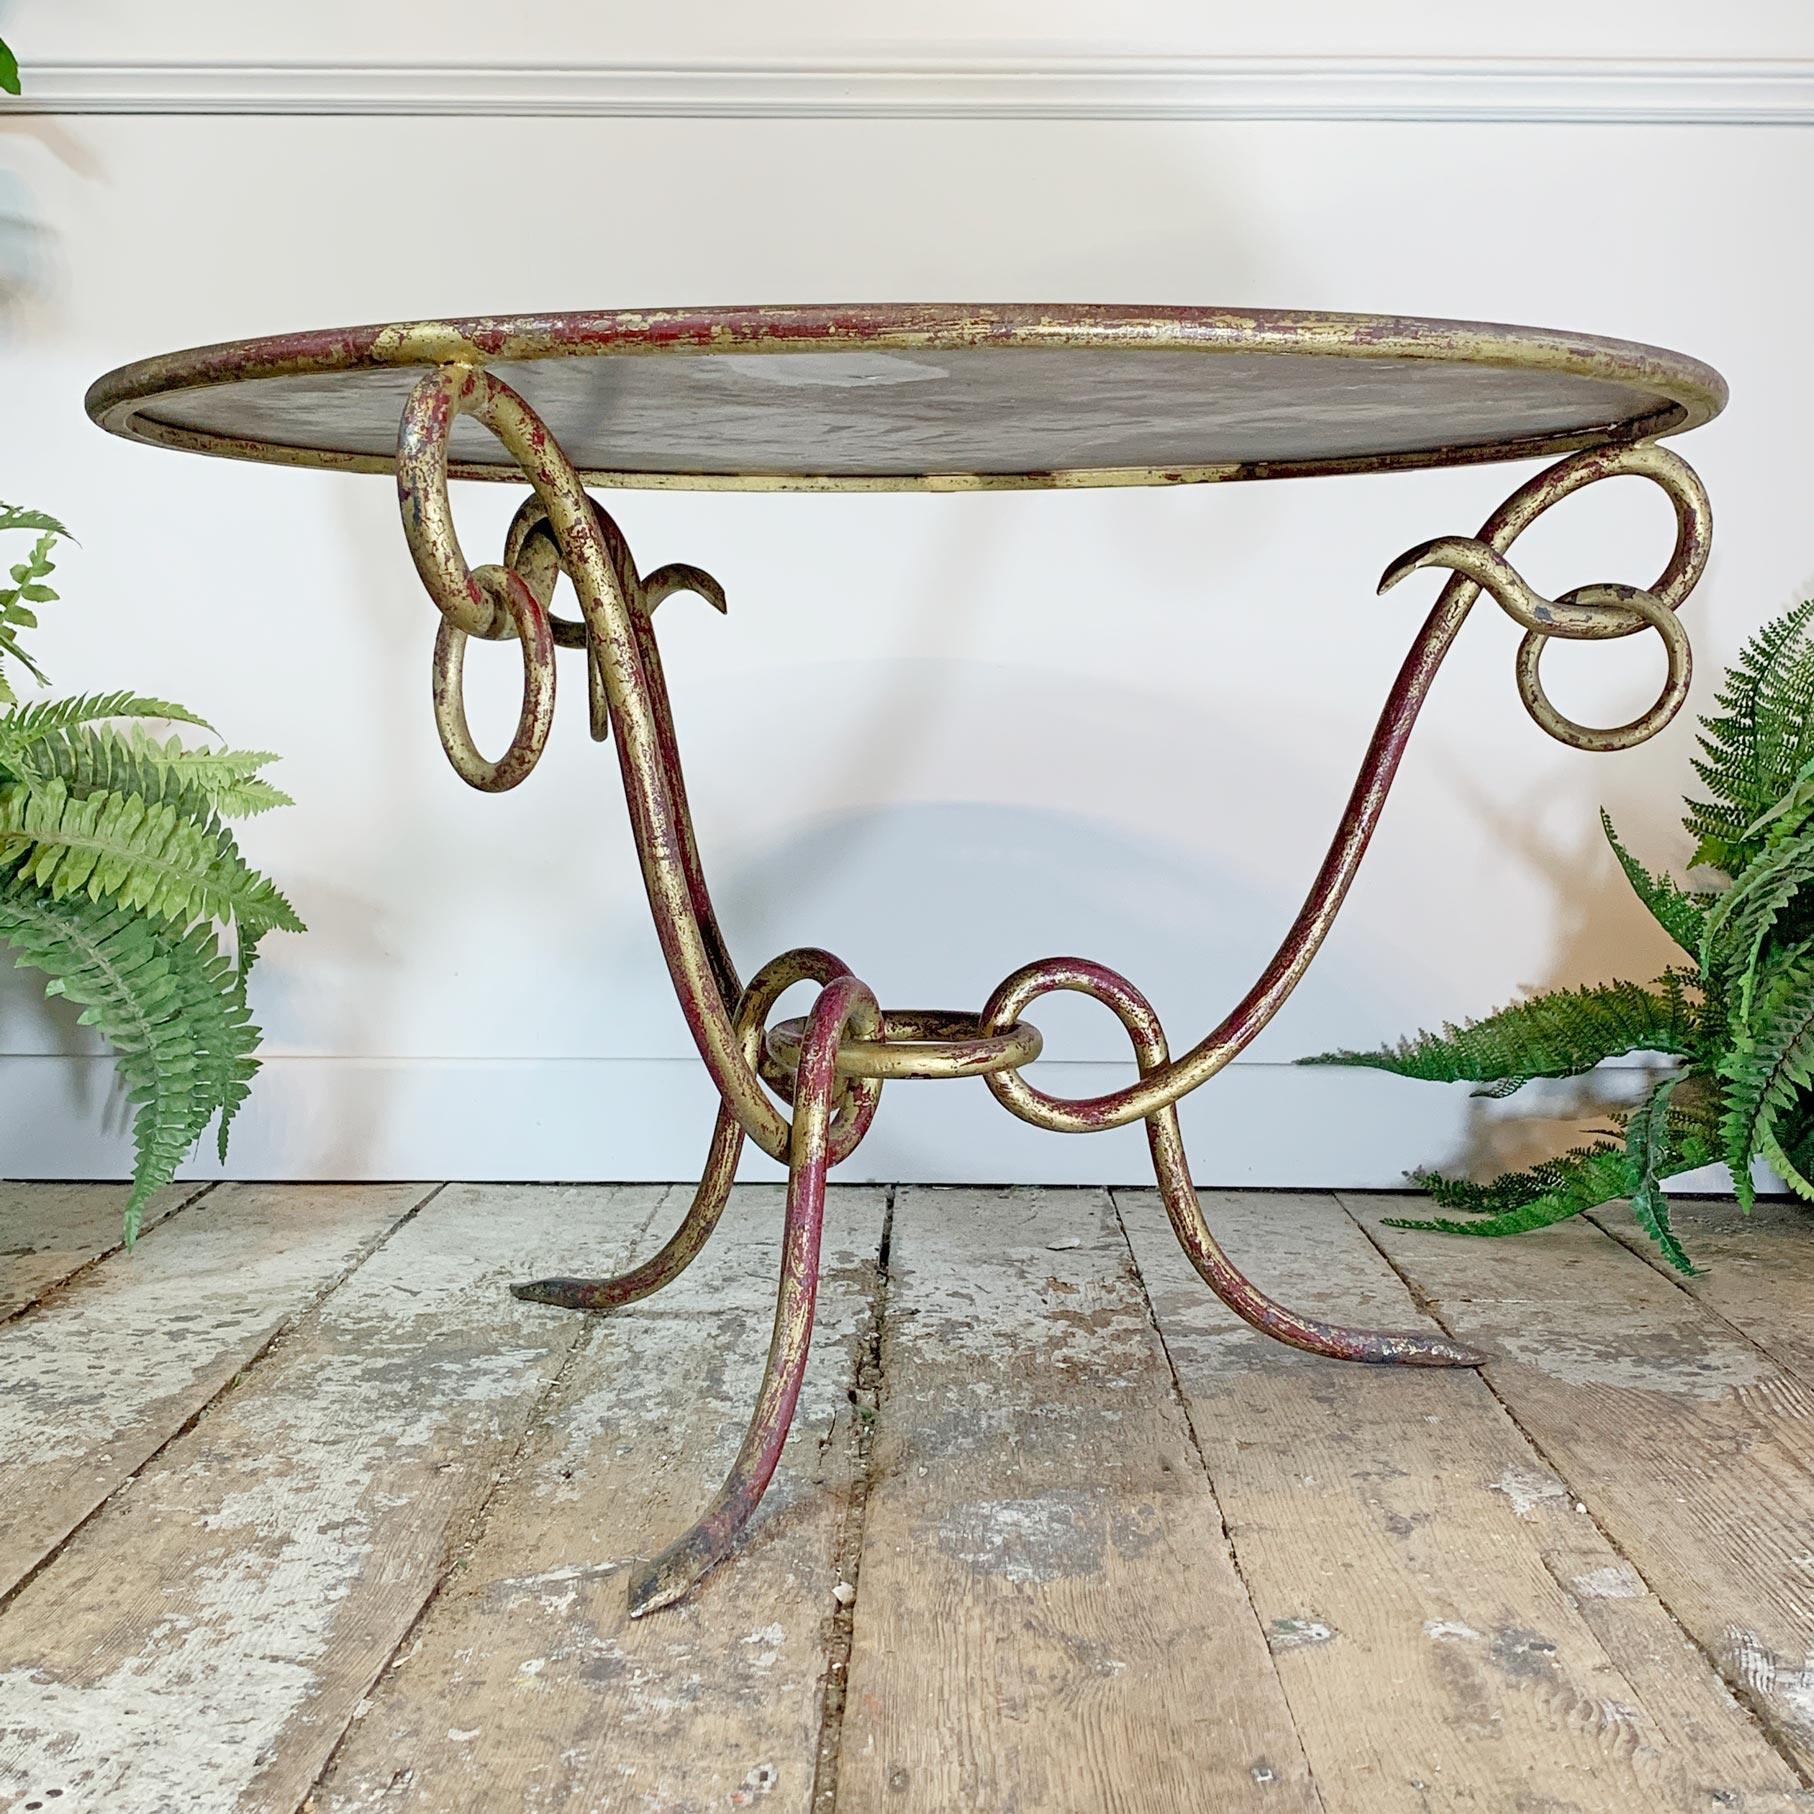 An exceptional coffee table in gilt wrought iron with distressed mirror plate top by the renowned designer Rene Drouet 1899 -1993. 

The heavy wrought iron base with ring details and visible bole beneath the gilt on the legs and edges, still